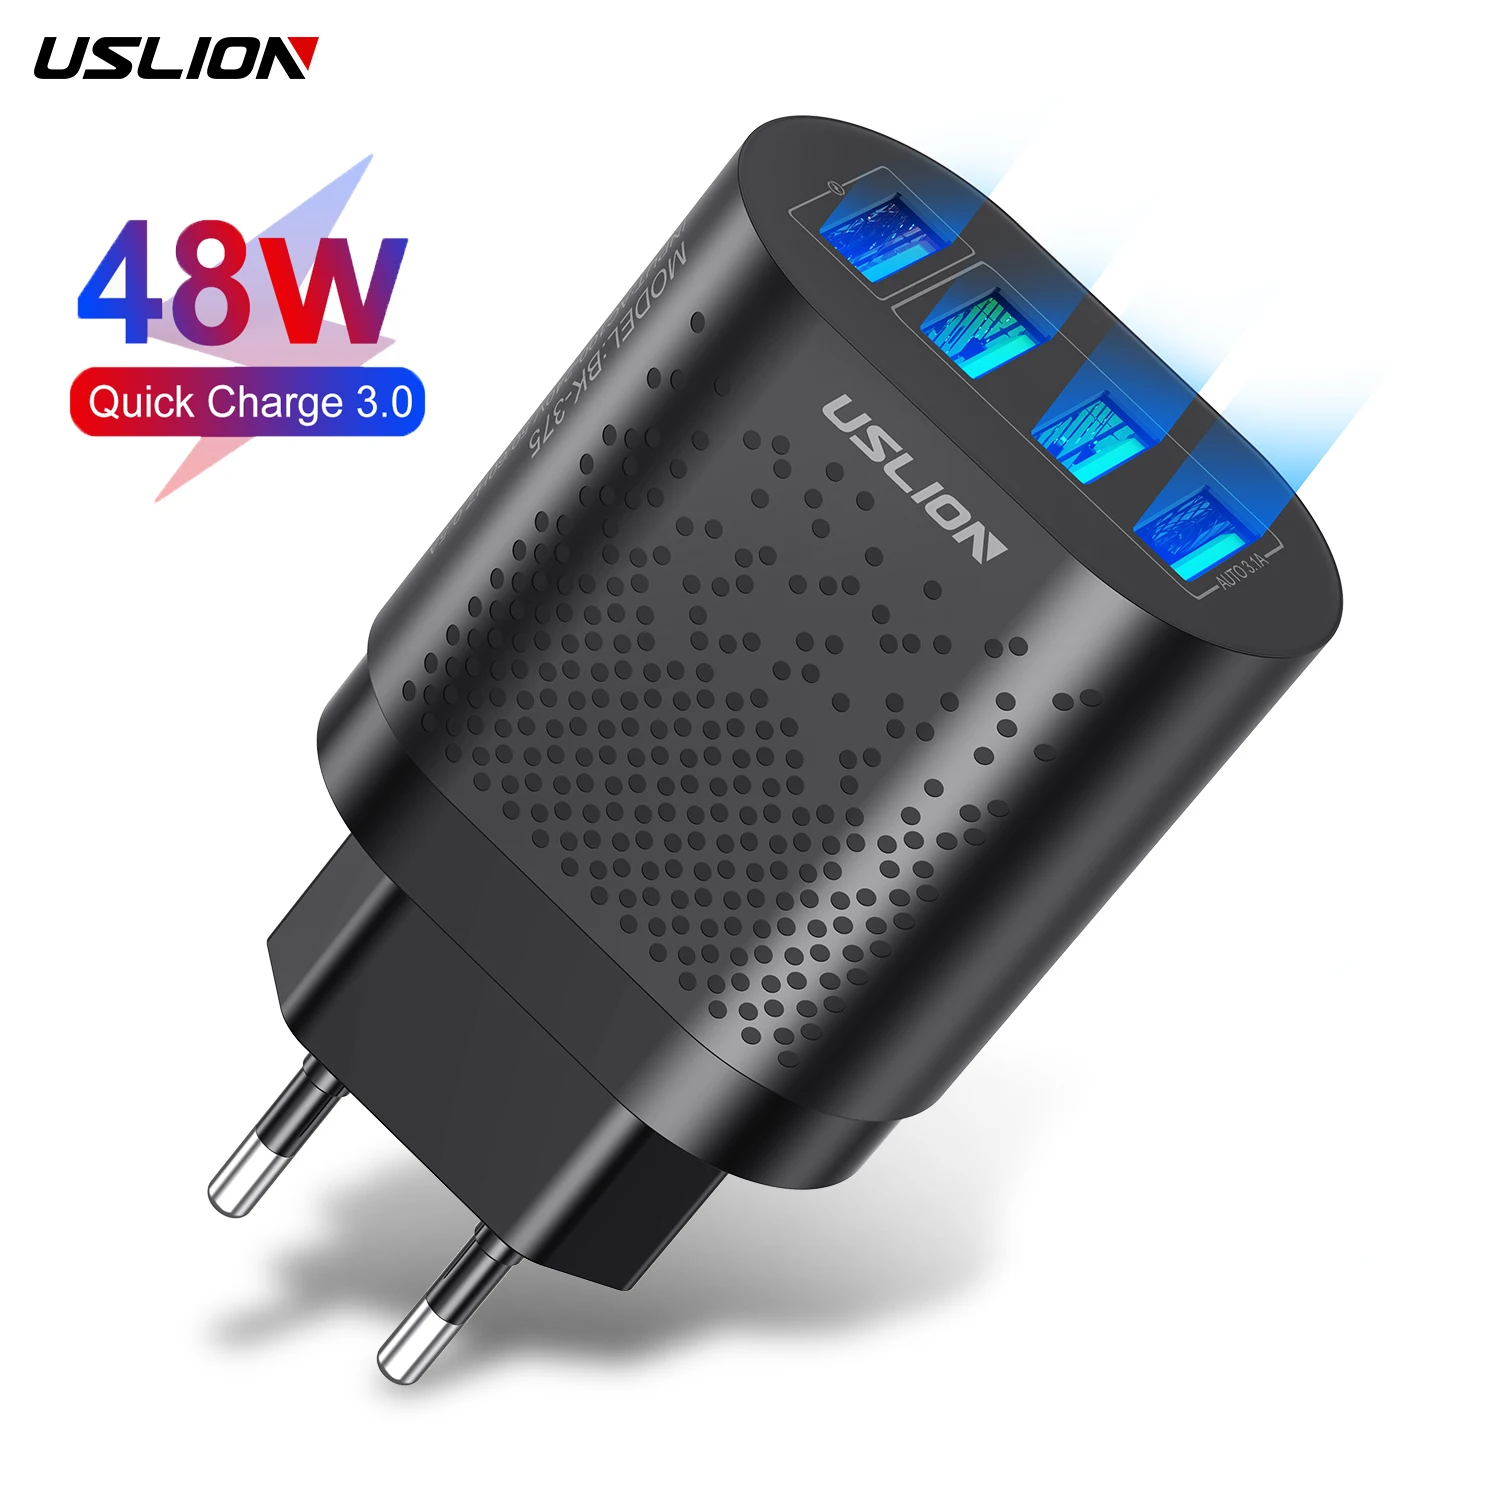 

USLION Universal Wall Socket 4 Port USB Chargers Mobile Phone 3A Tablet charger QC 3.0 Fast Mobile Phone Travel Wall Charger